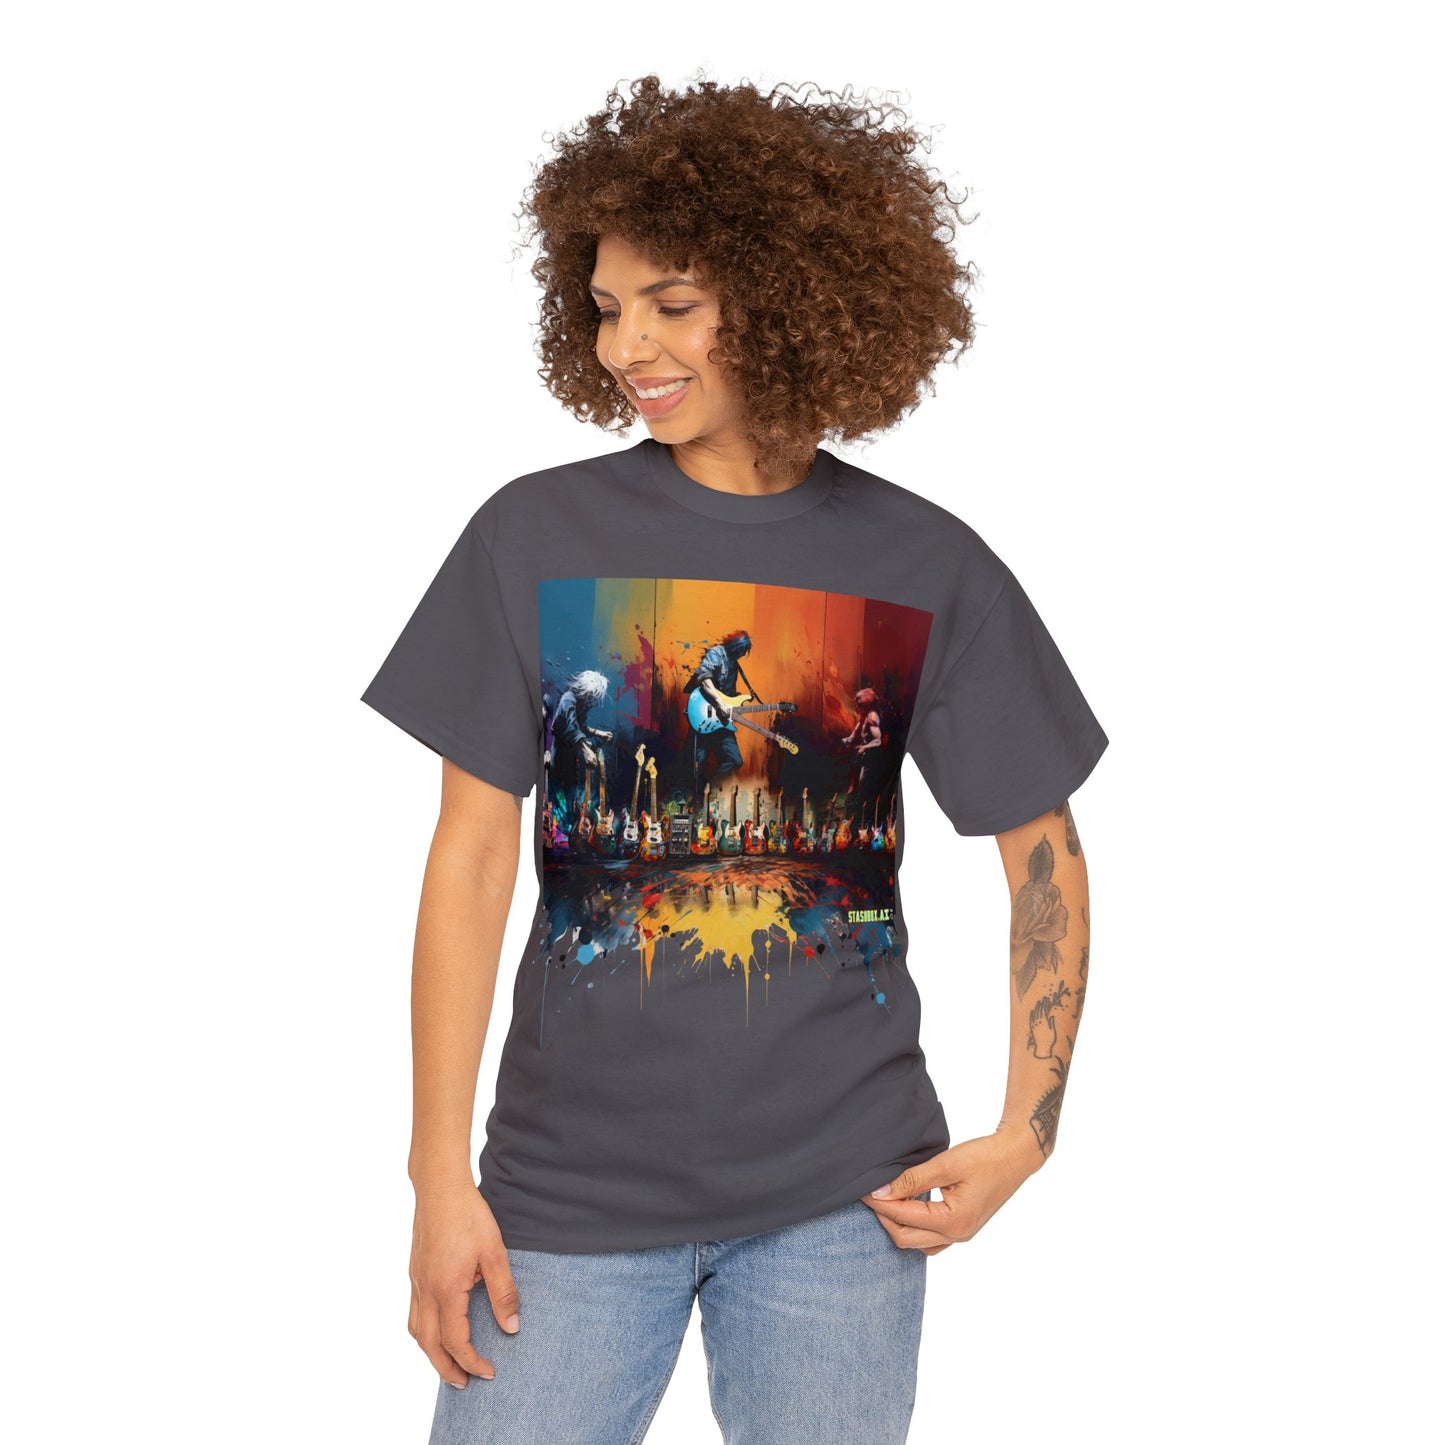 Unisex Adult Size Heavy Cotton TShirt - Colorful Abstract Guitars Design 005